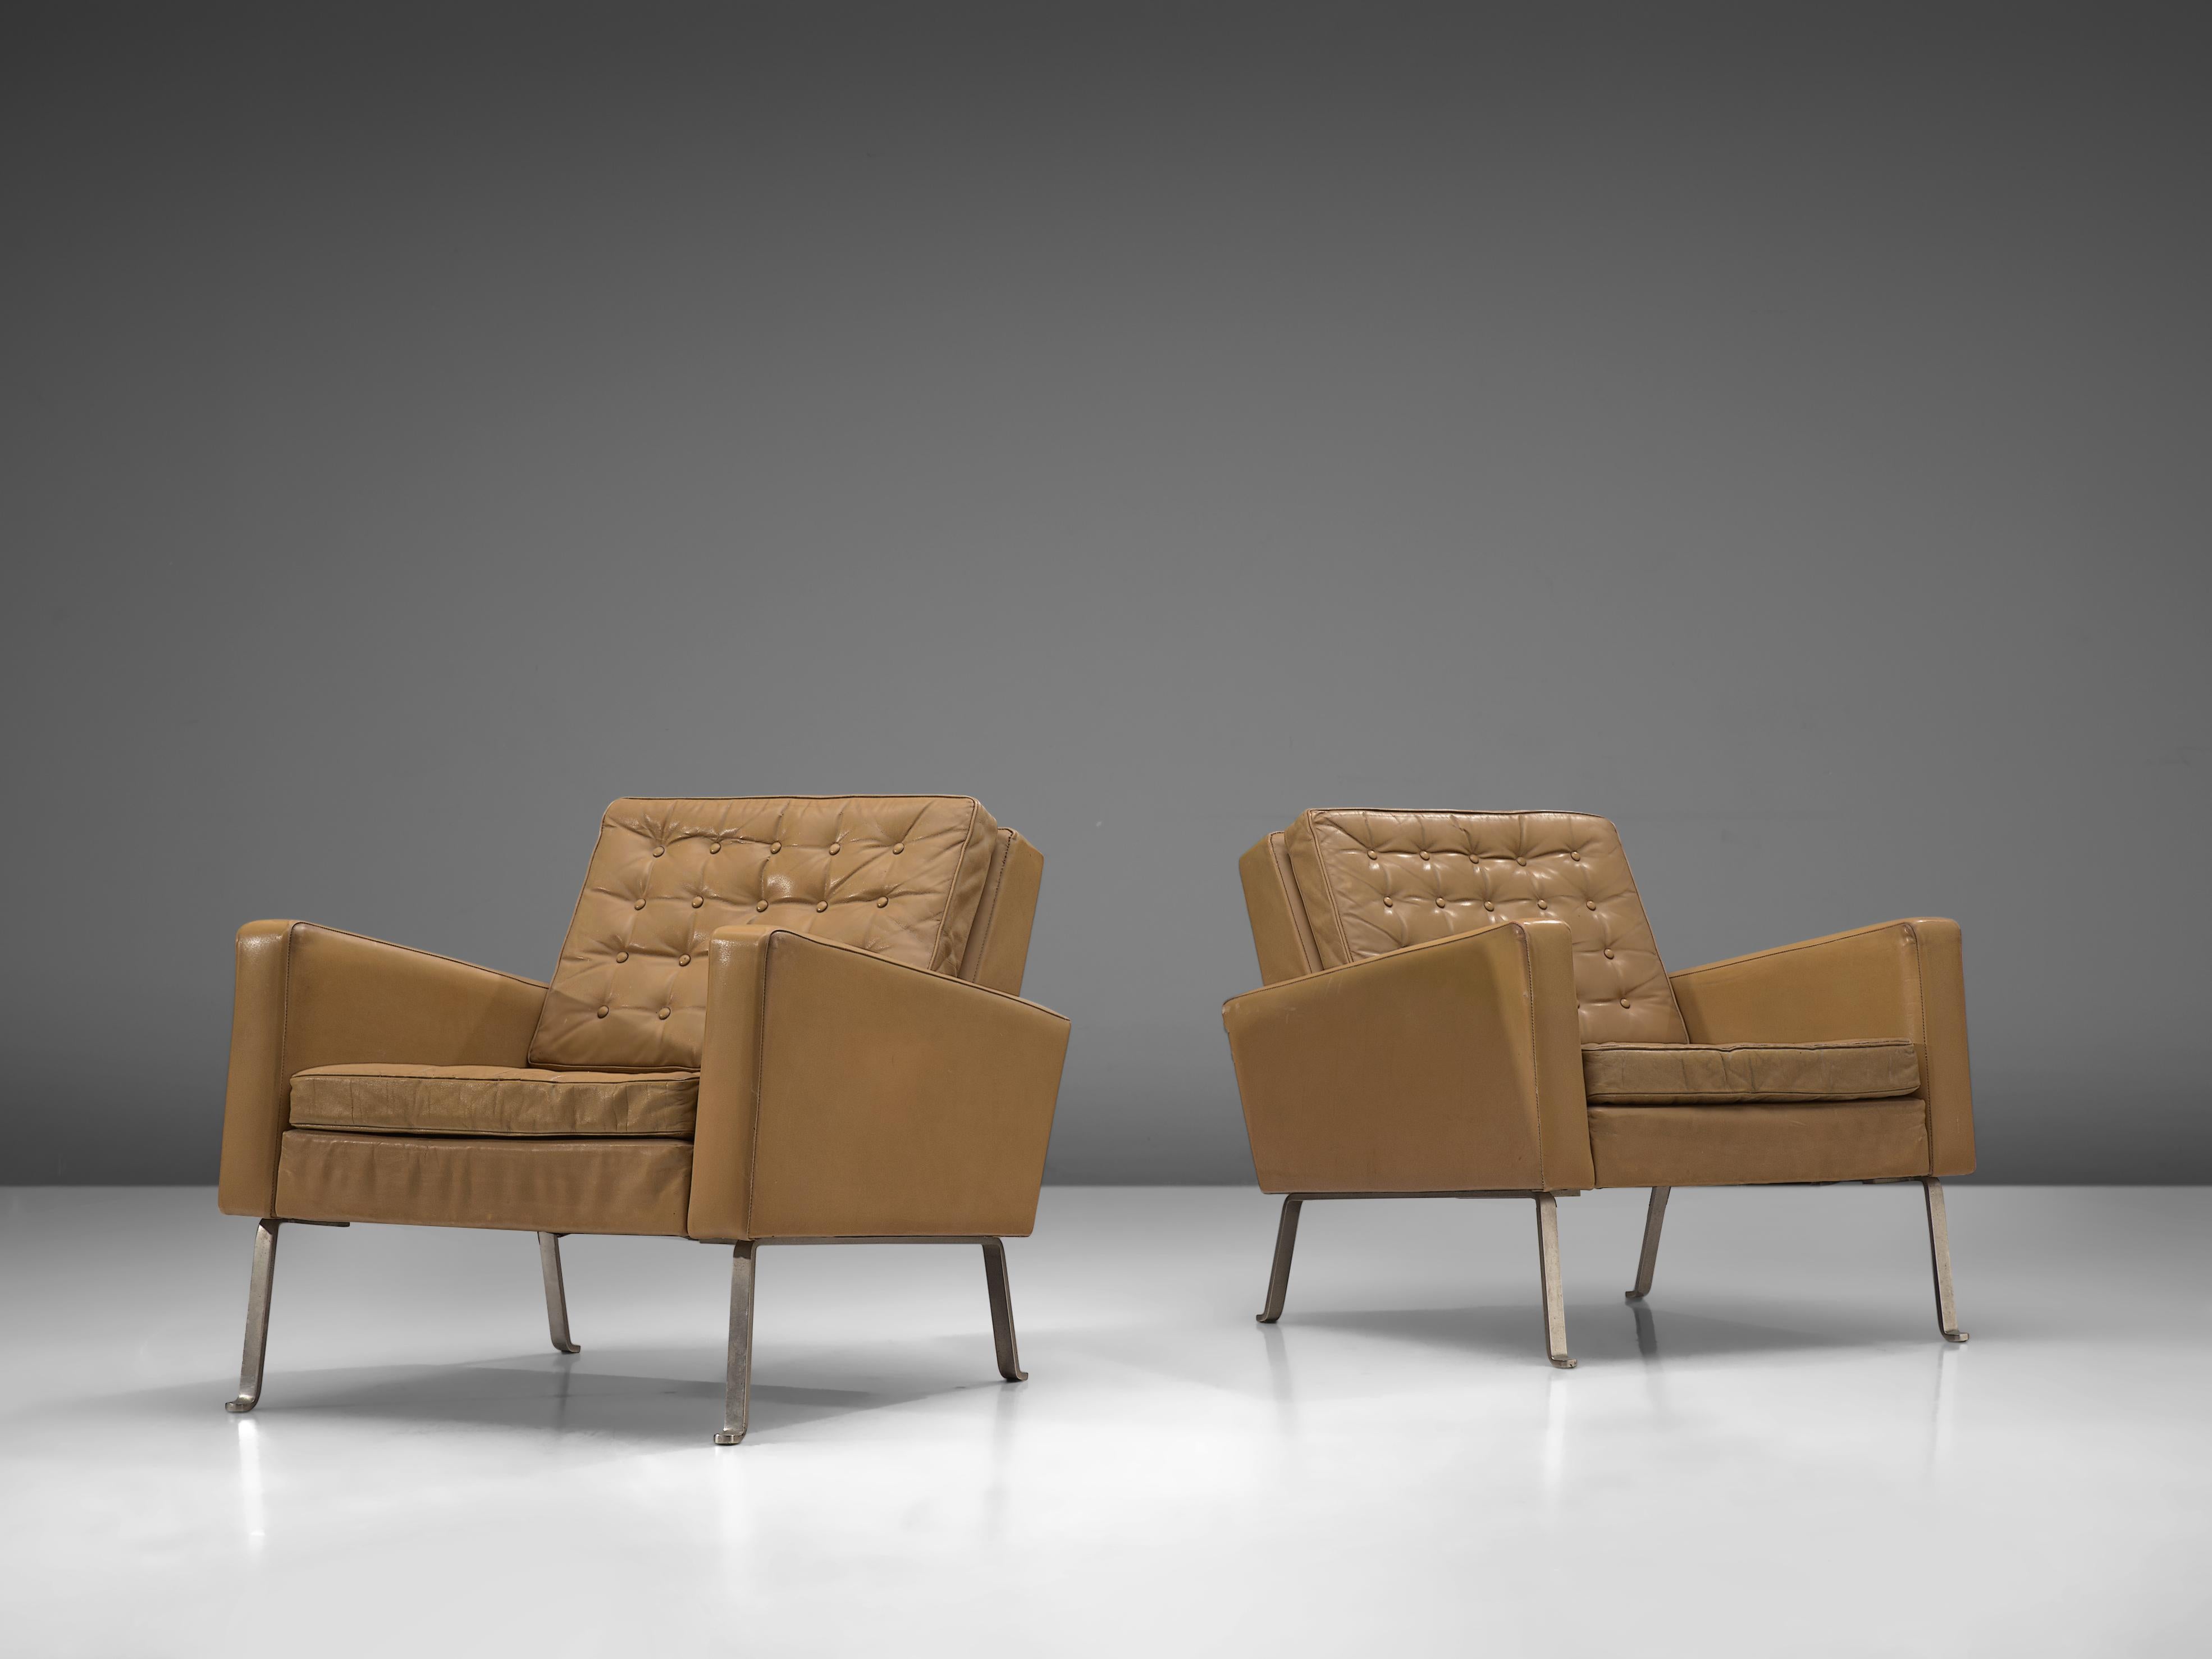 Roland Ranier, lounge chairs, leather, steel, Austria, 1950s

Modern and beautiful armchairs. These chairs form an extraordinary stately set, being both crisp and warm at the same time. The steel frame holds a brown beige leather body with buttoned